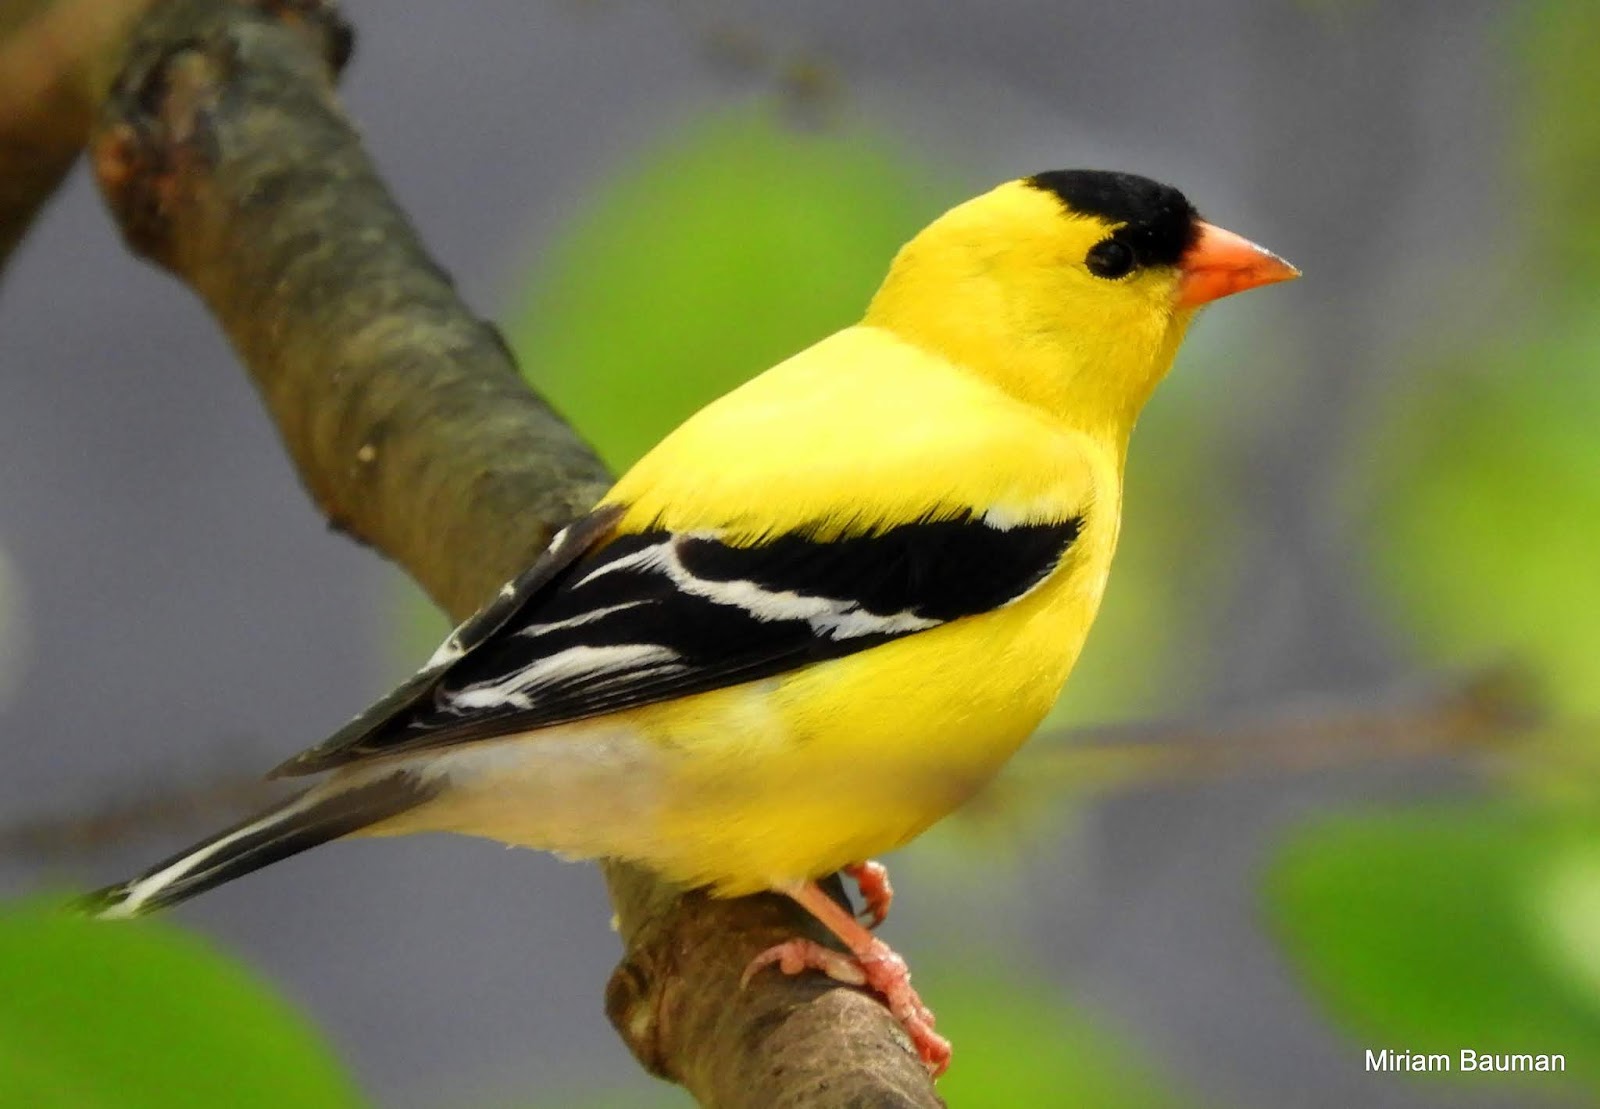 The Bright and Beautiful American Goldfinch